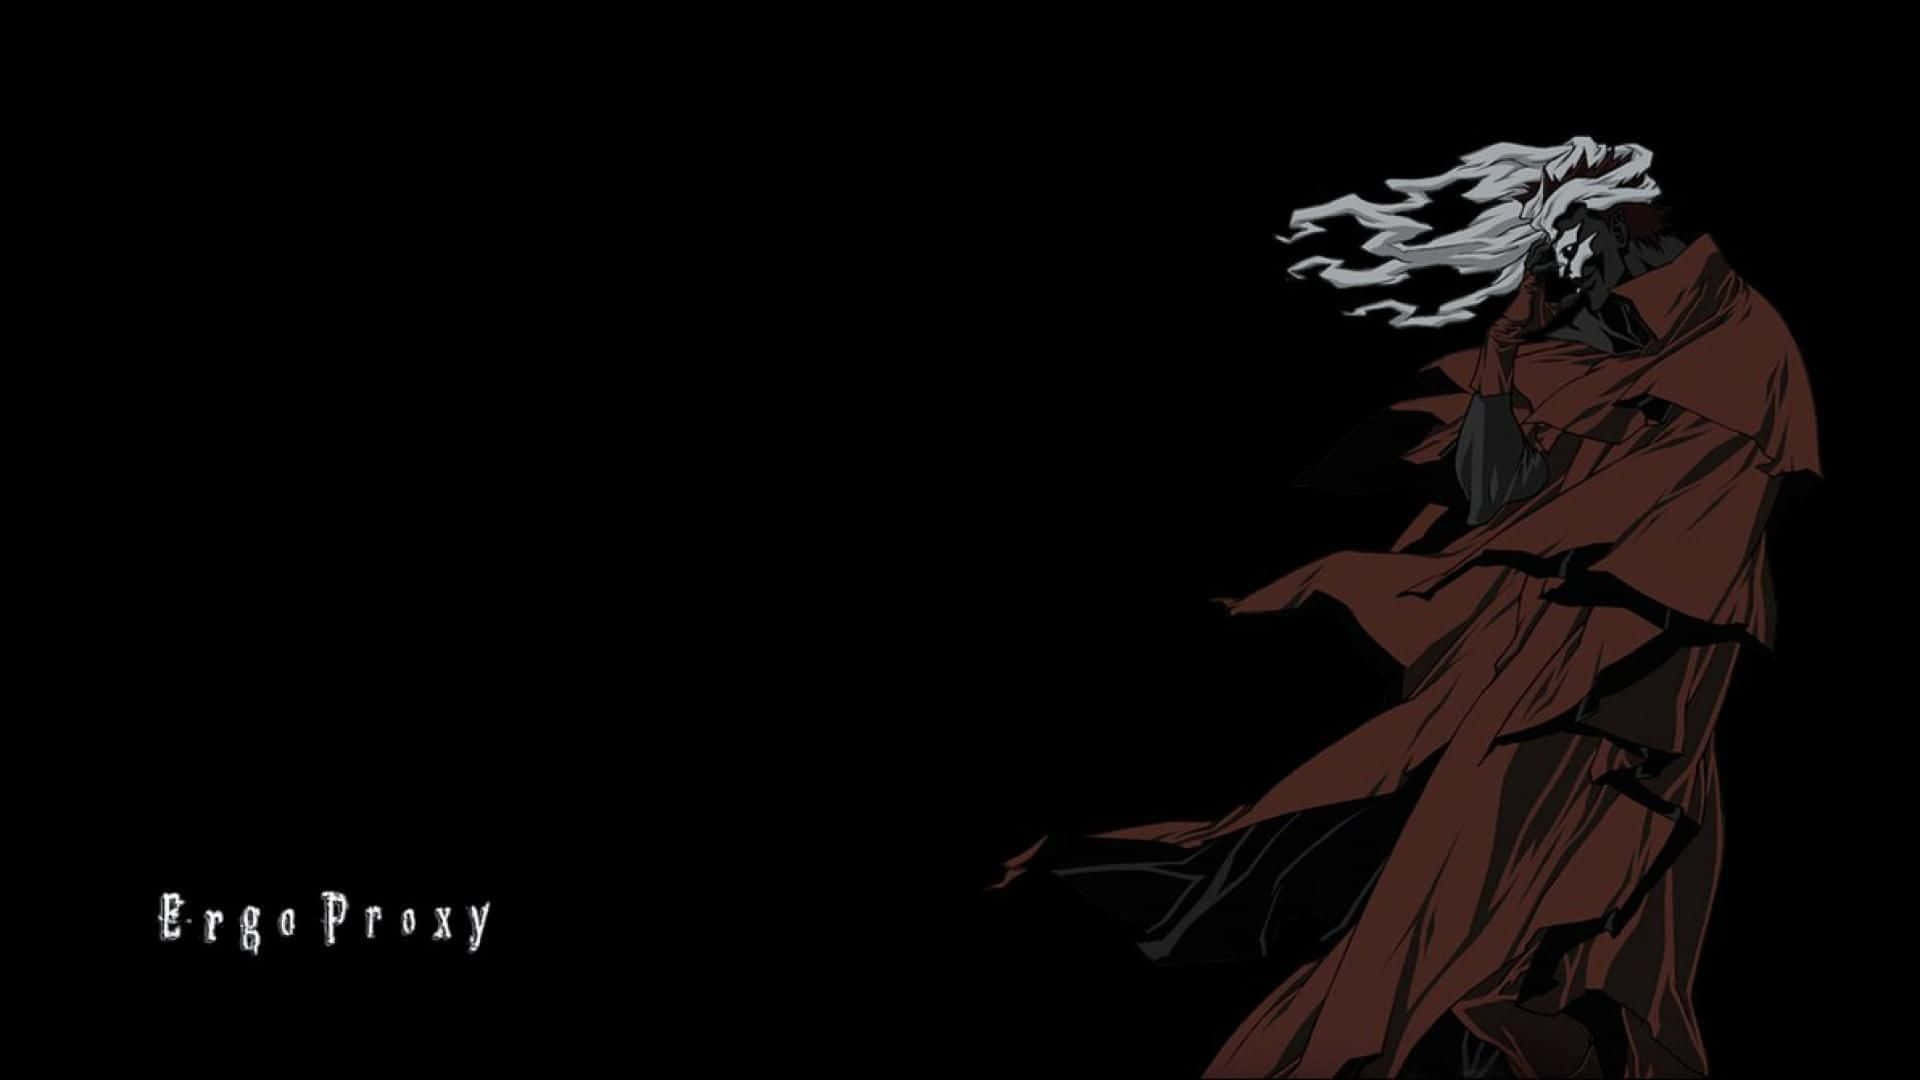 Download Protagonist From Ergo Proxy In A Dramatic Backdrop Wallpaper